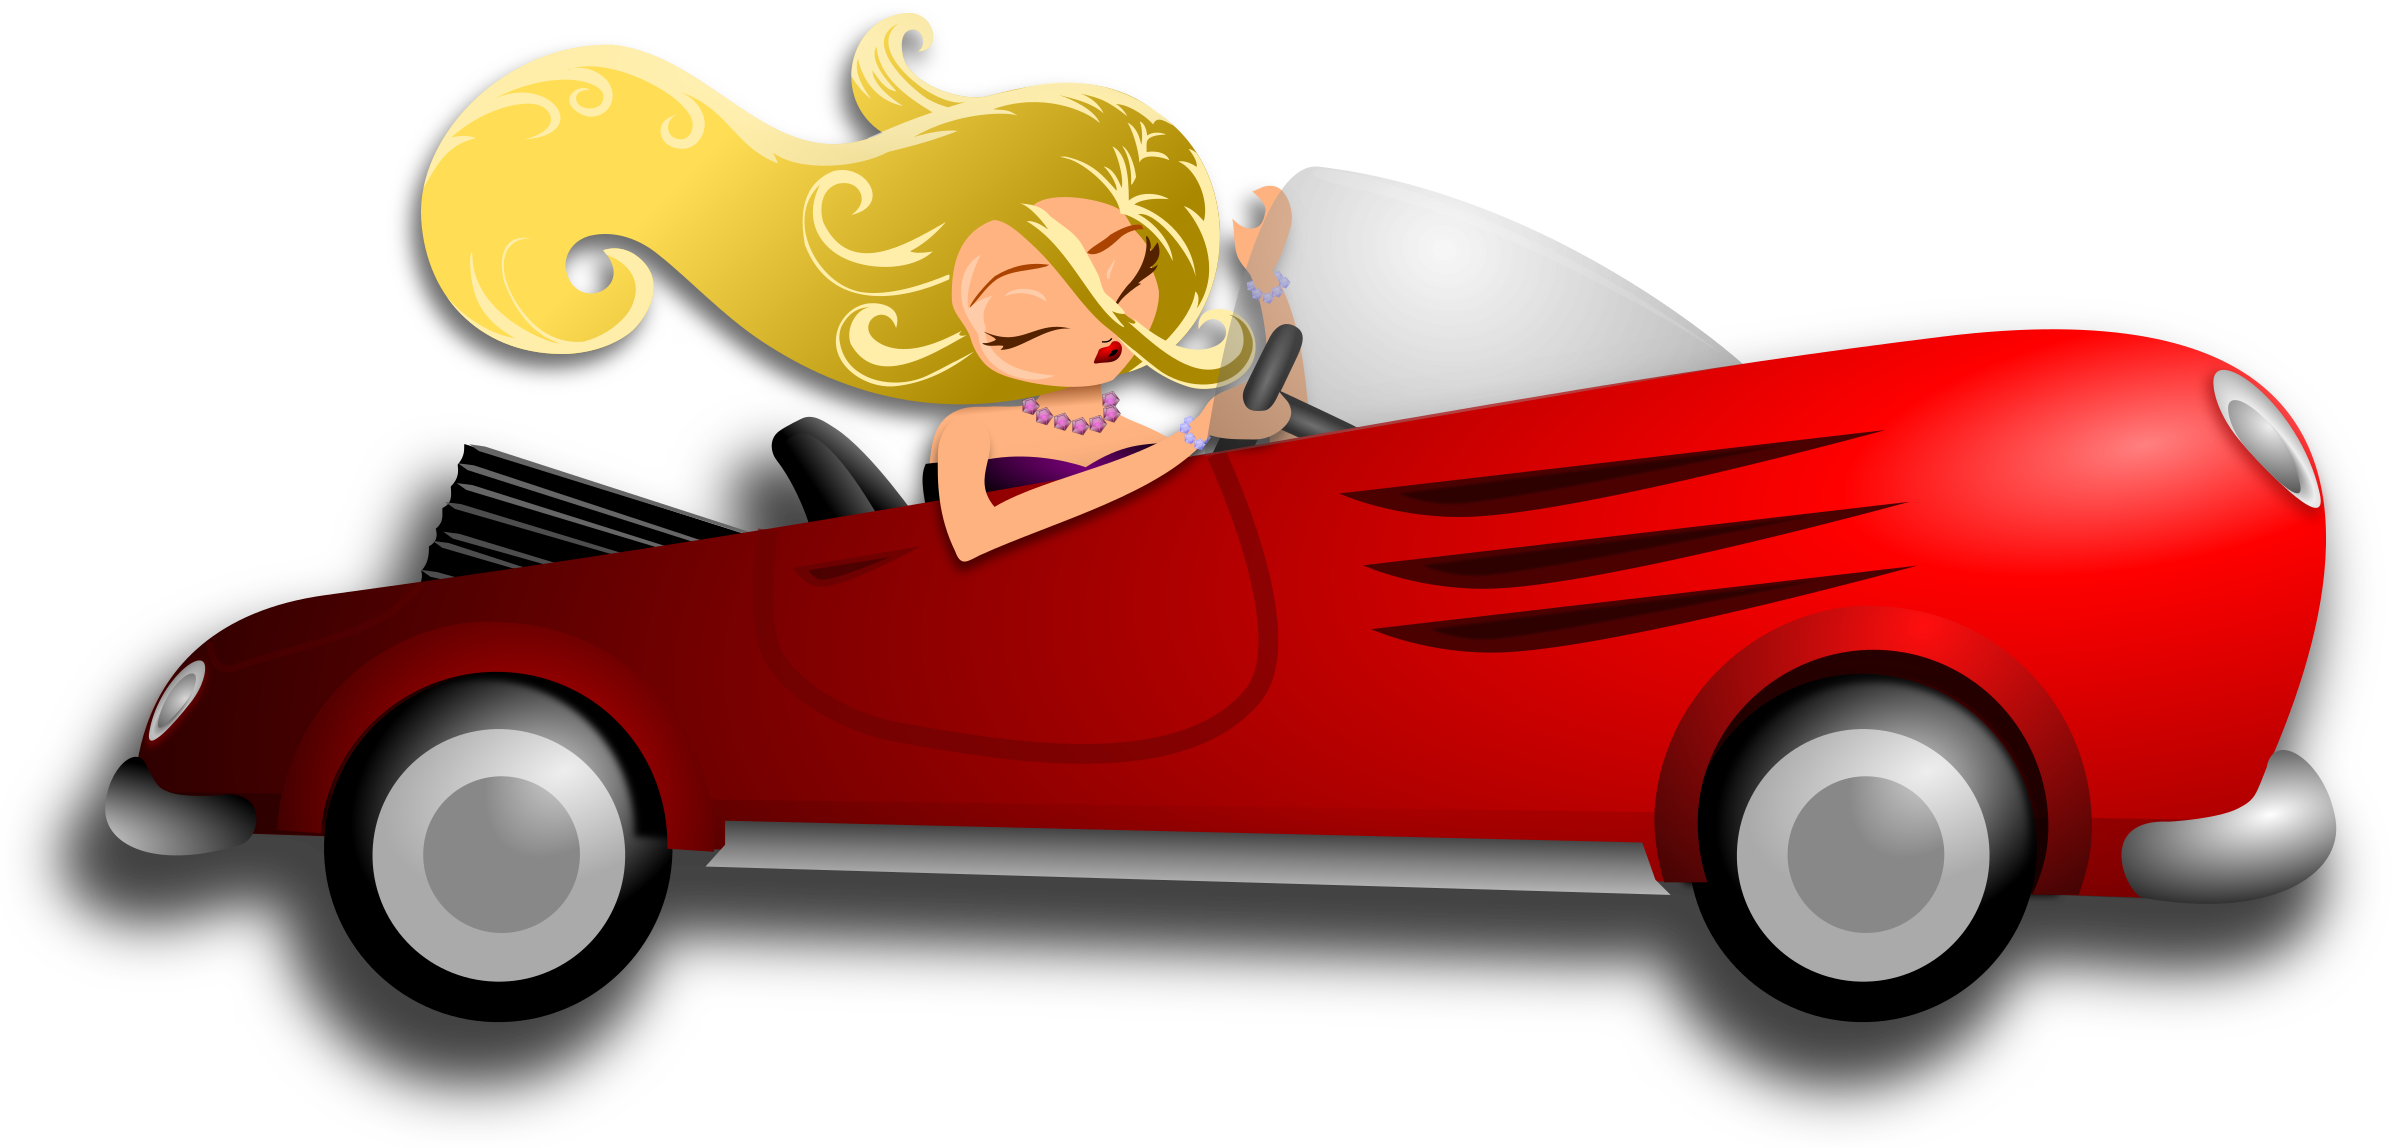 Glamorous lady driving big. Driver clipart woman driver